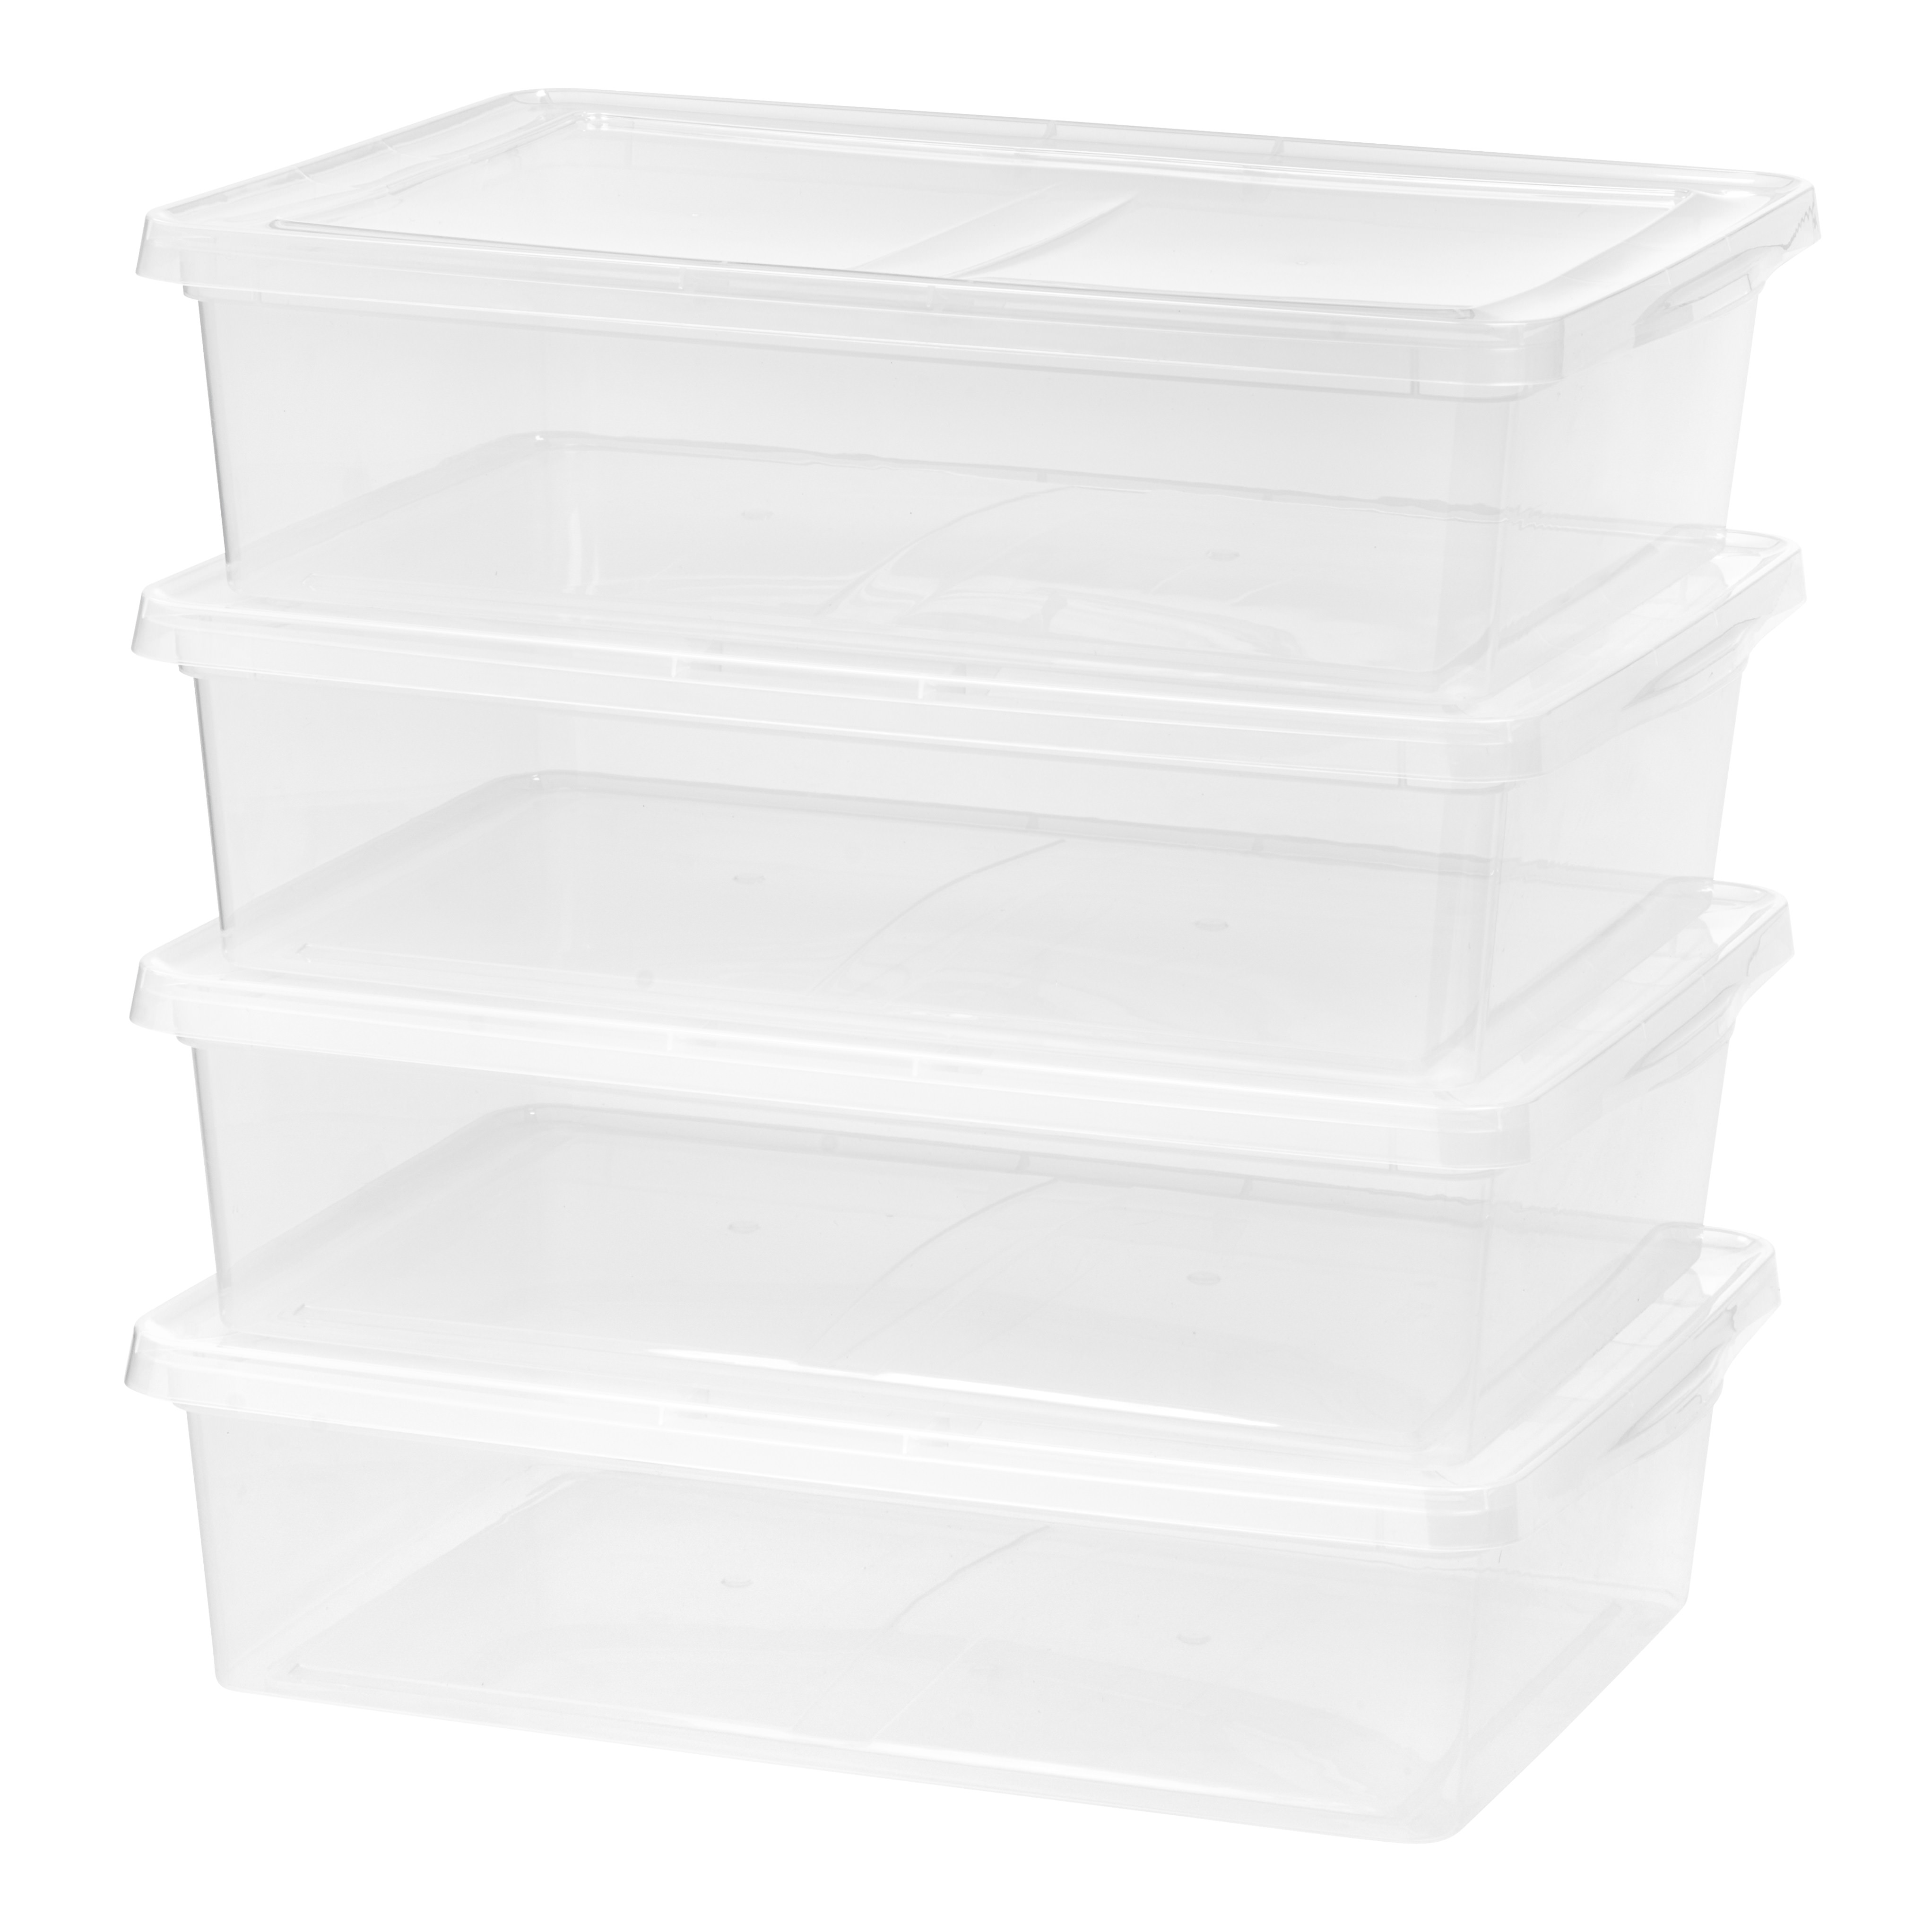 Mainstays 28 Qt. (7 gal.) Under Bed Plastic Storage Box, Clear, Set of 4 - image 1 of 8